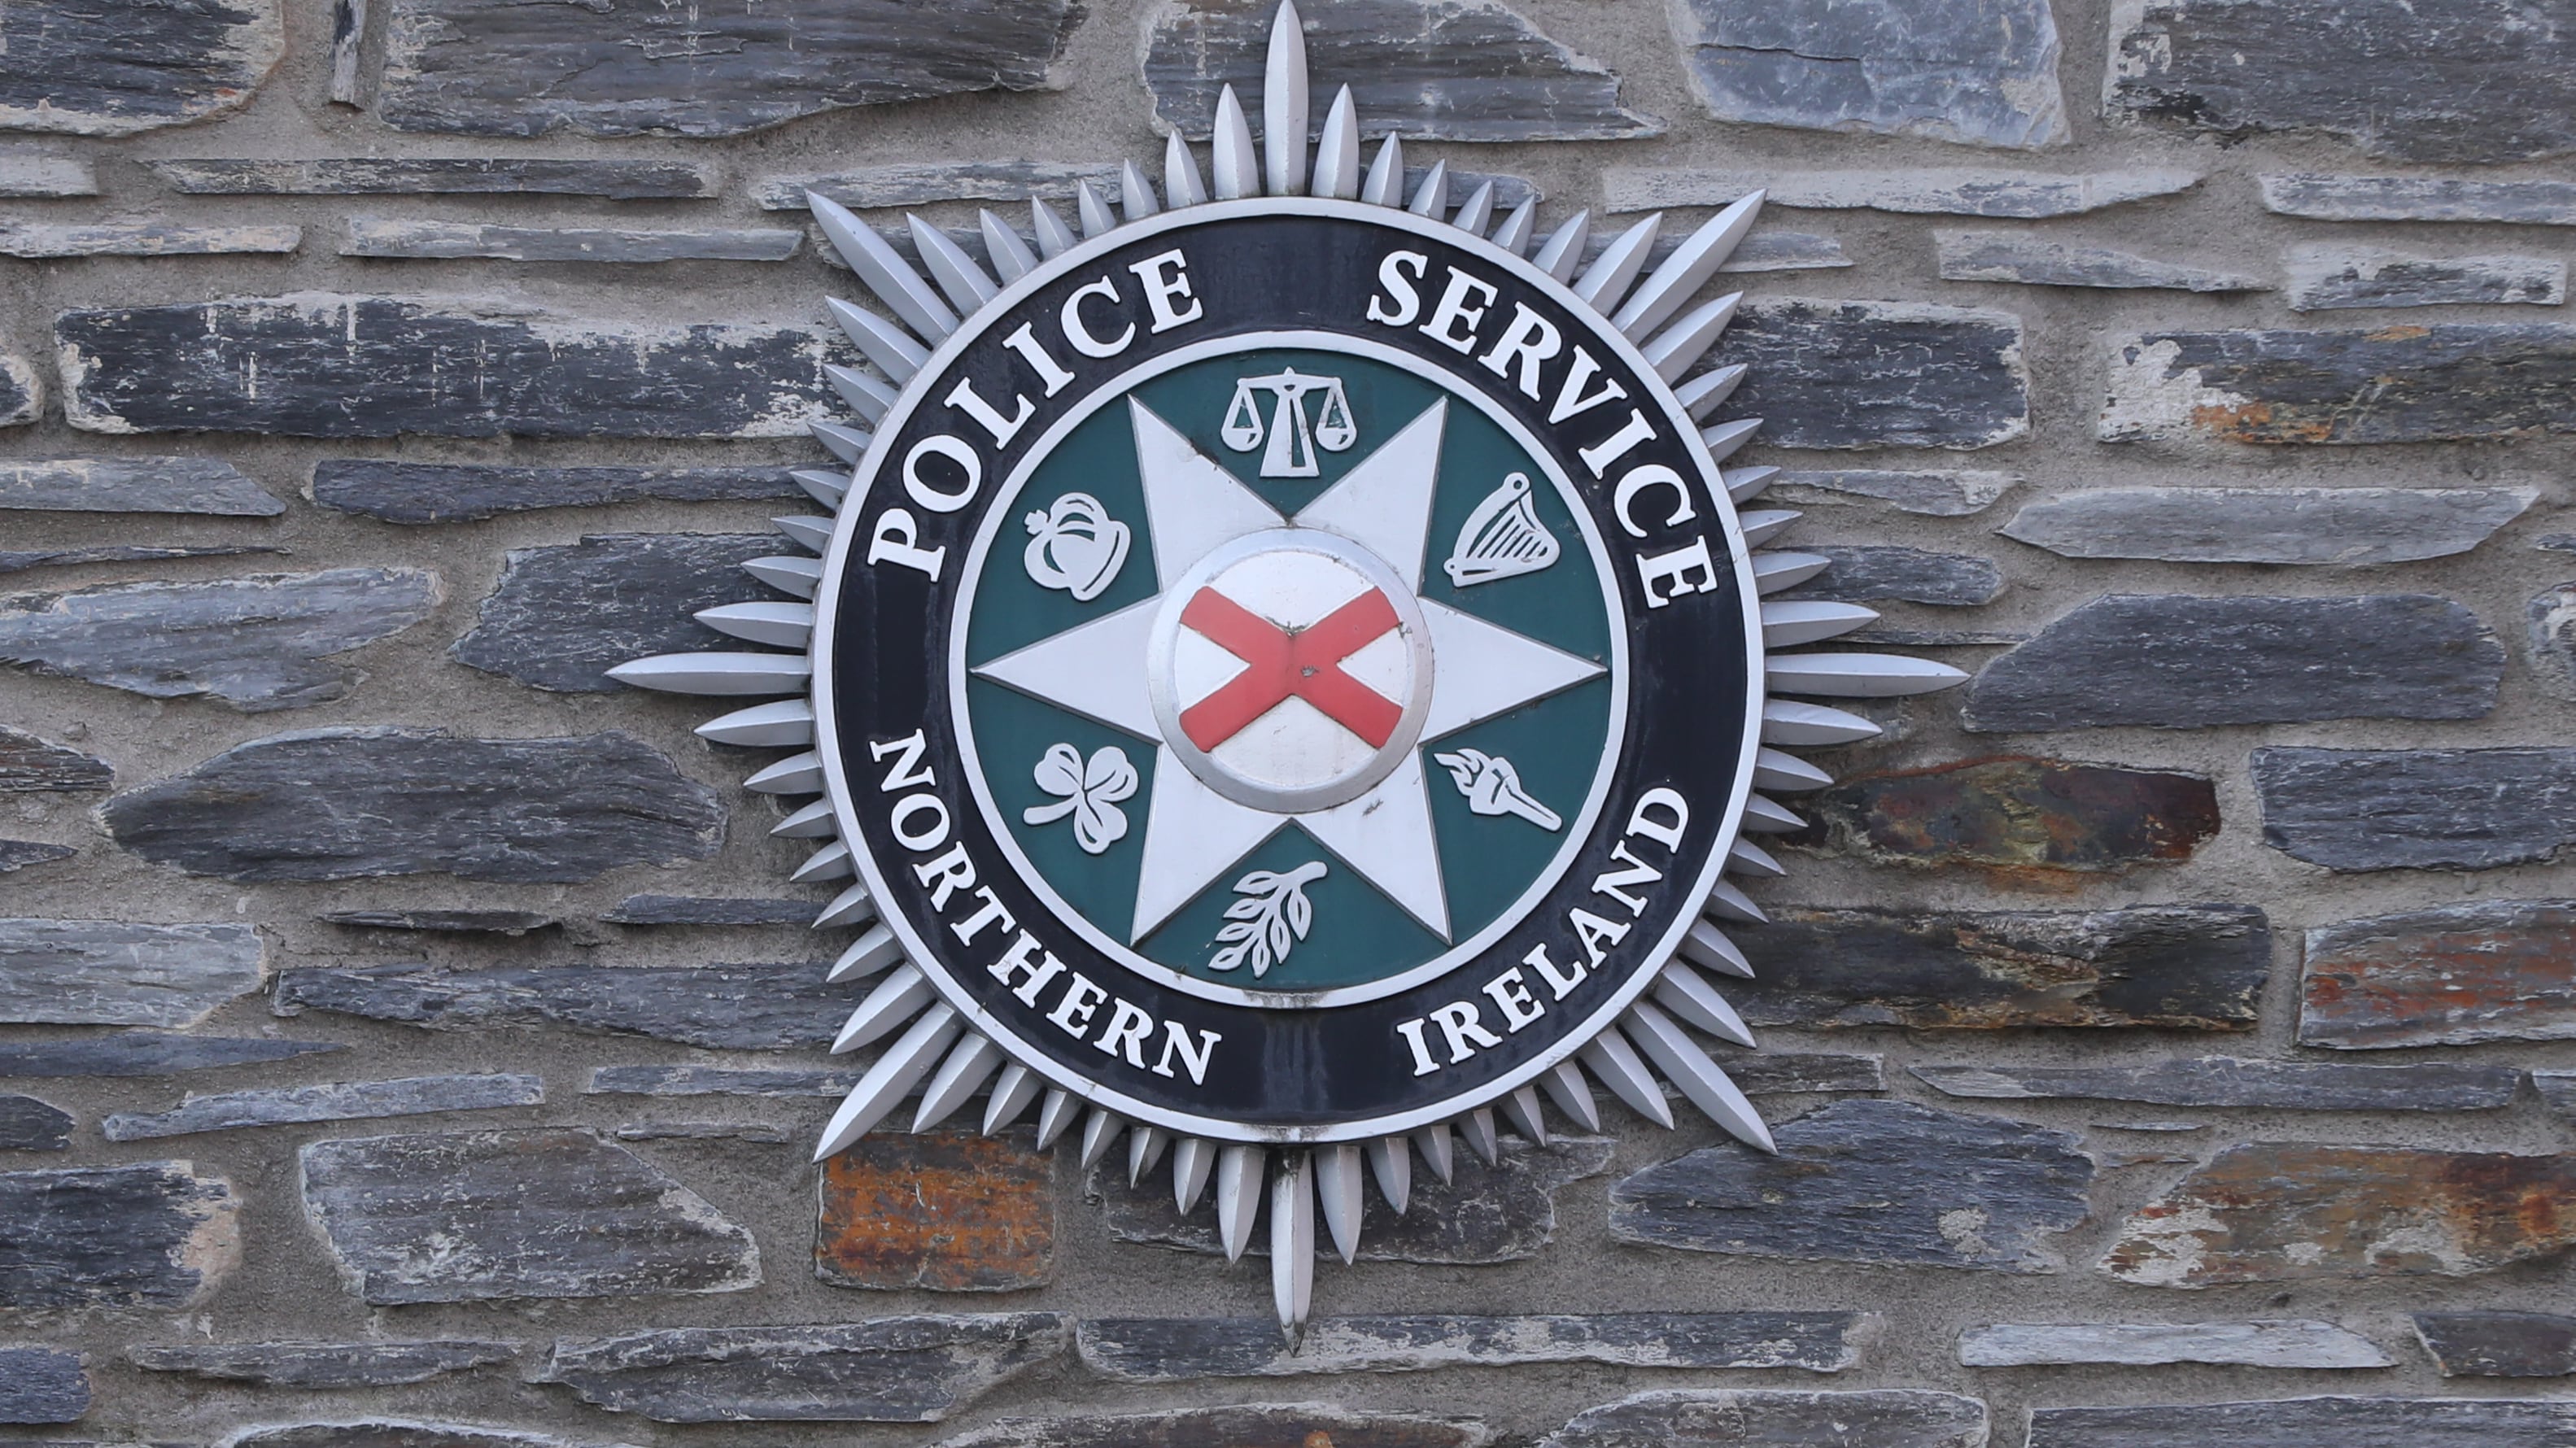 The PSNI has appealed for information after a goose was seriously injured in Co Armagh